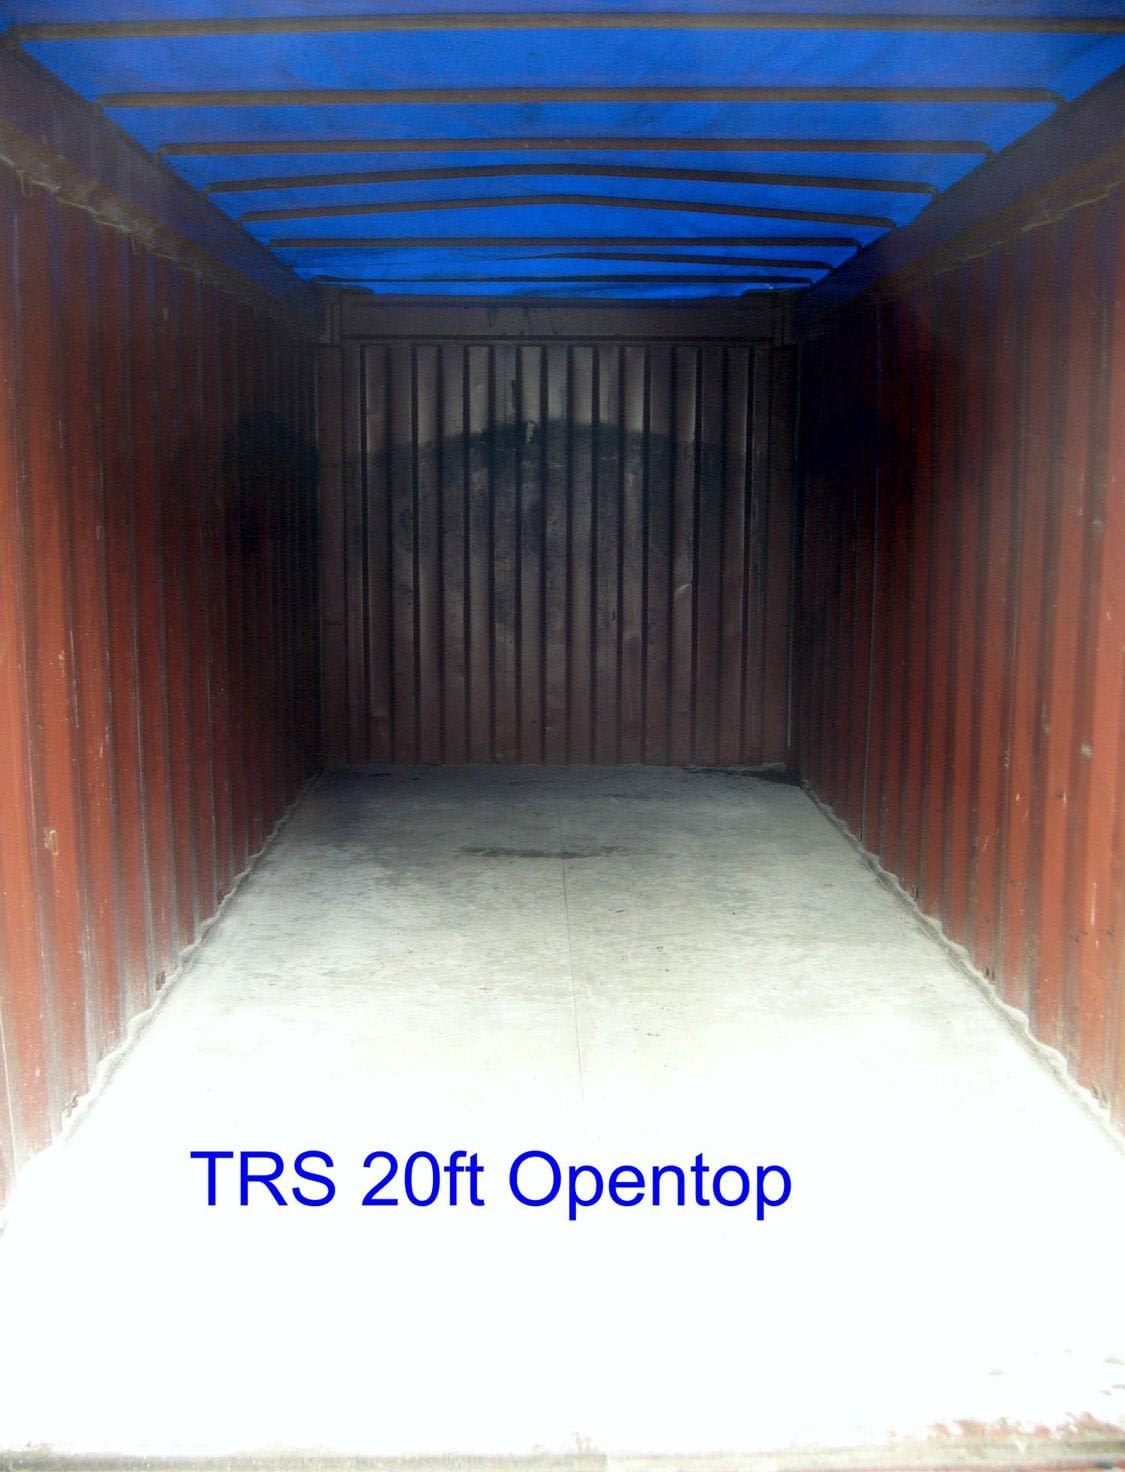 TRS sells and rents used 20ft canvas top opentops